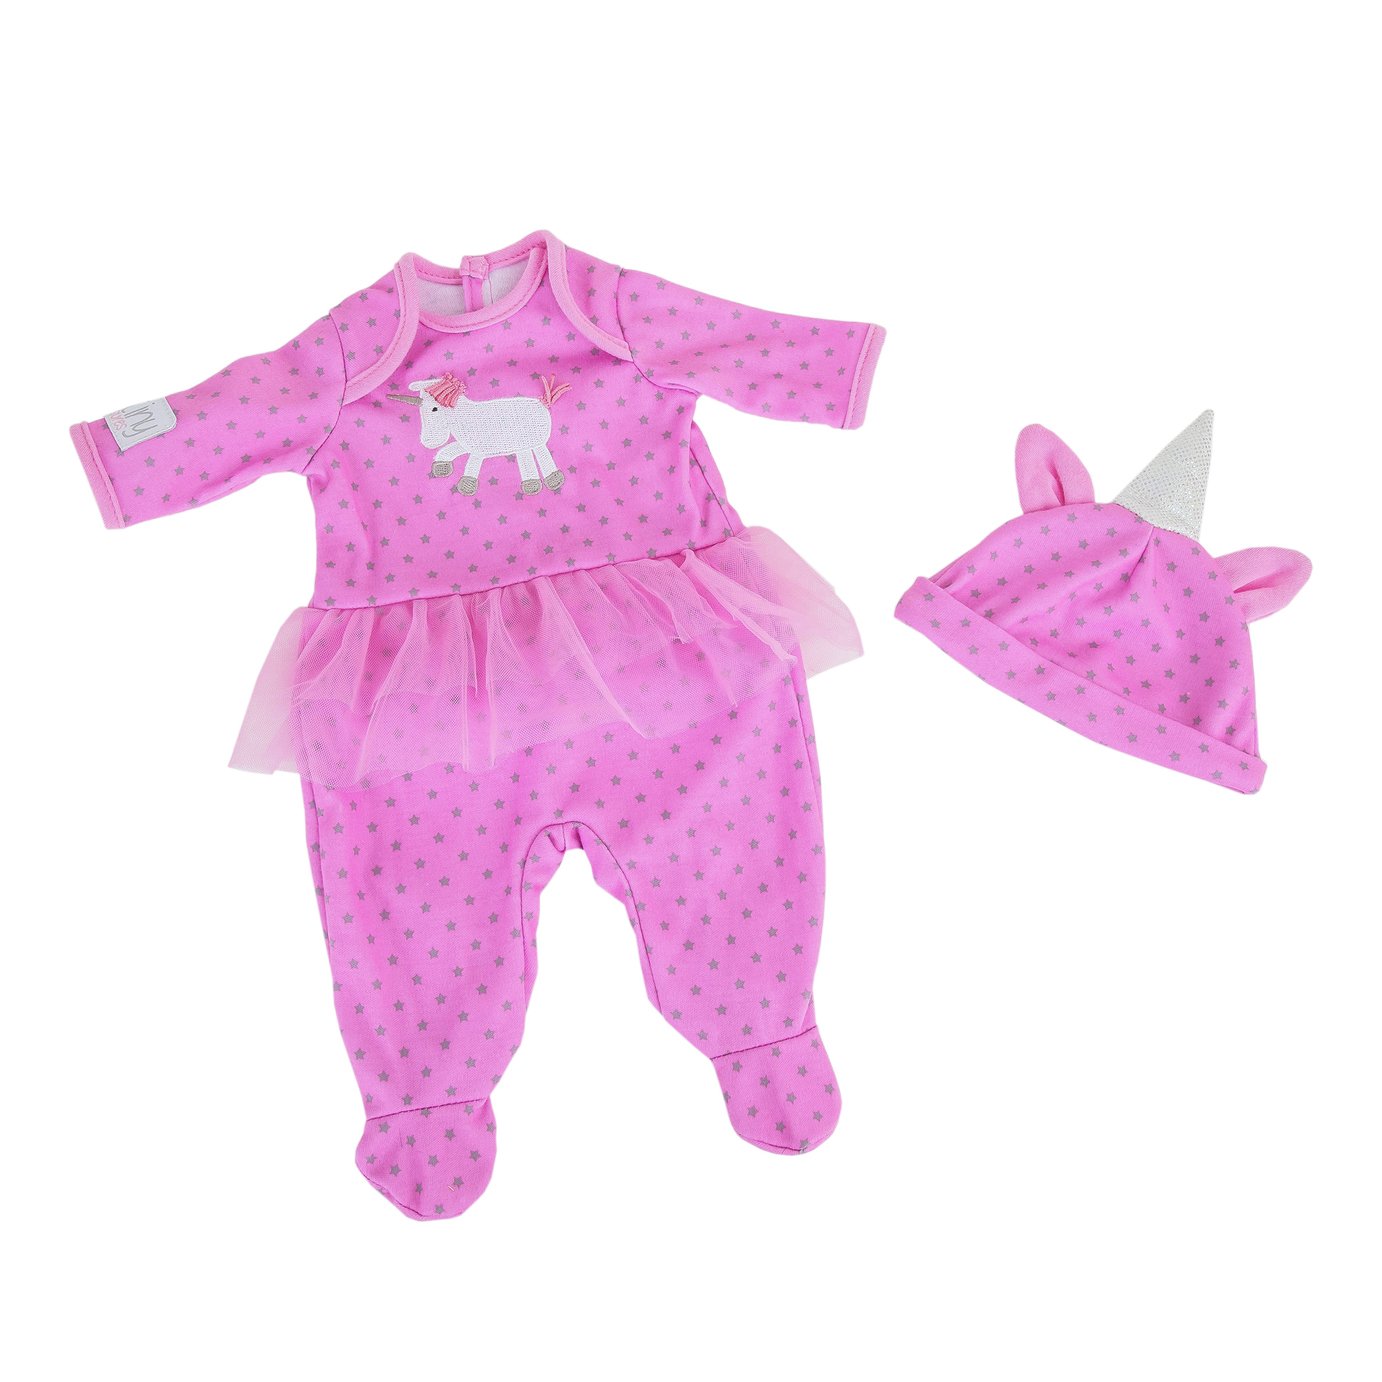 Chad Valley Tiny Treasures Unicorn Outfit